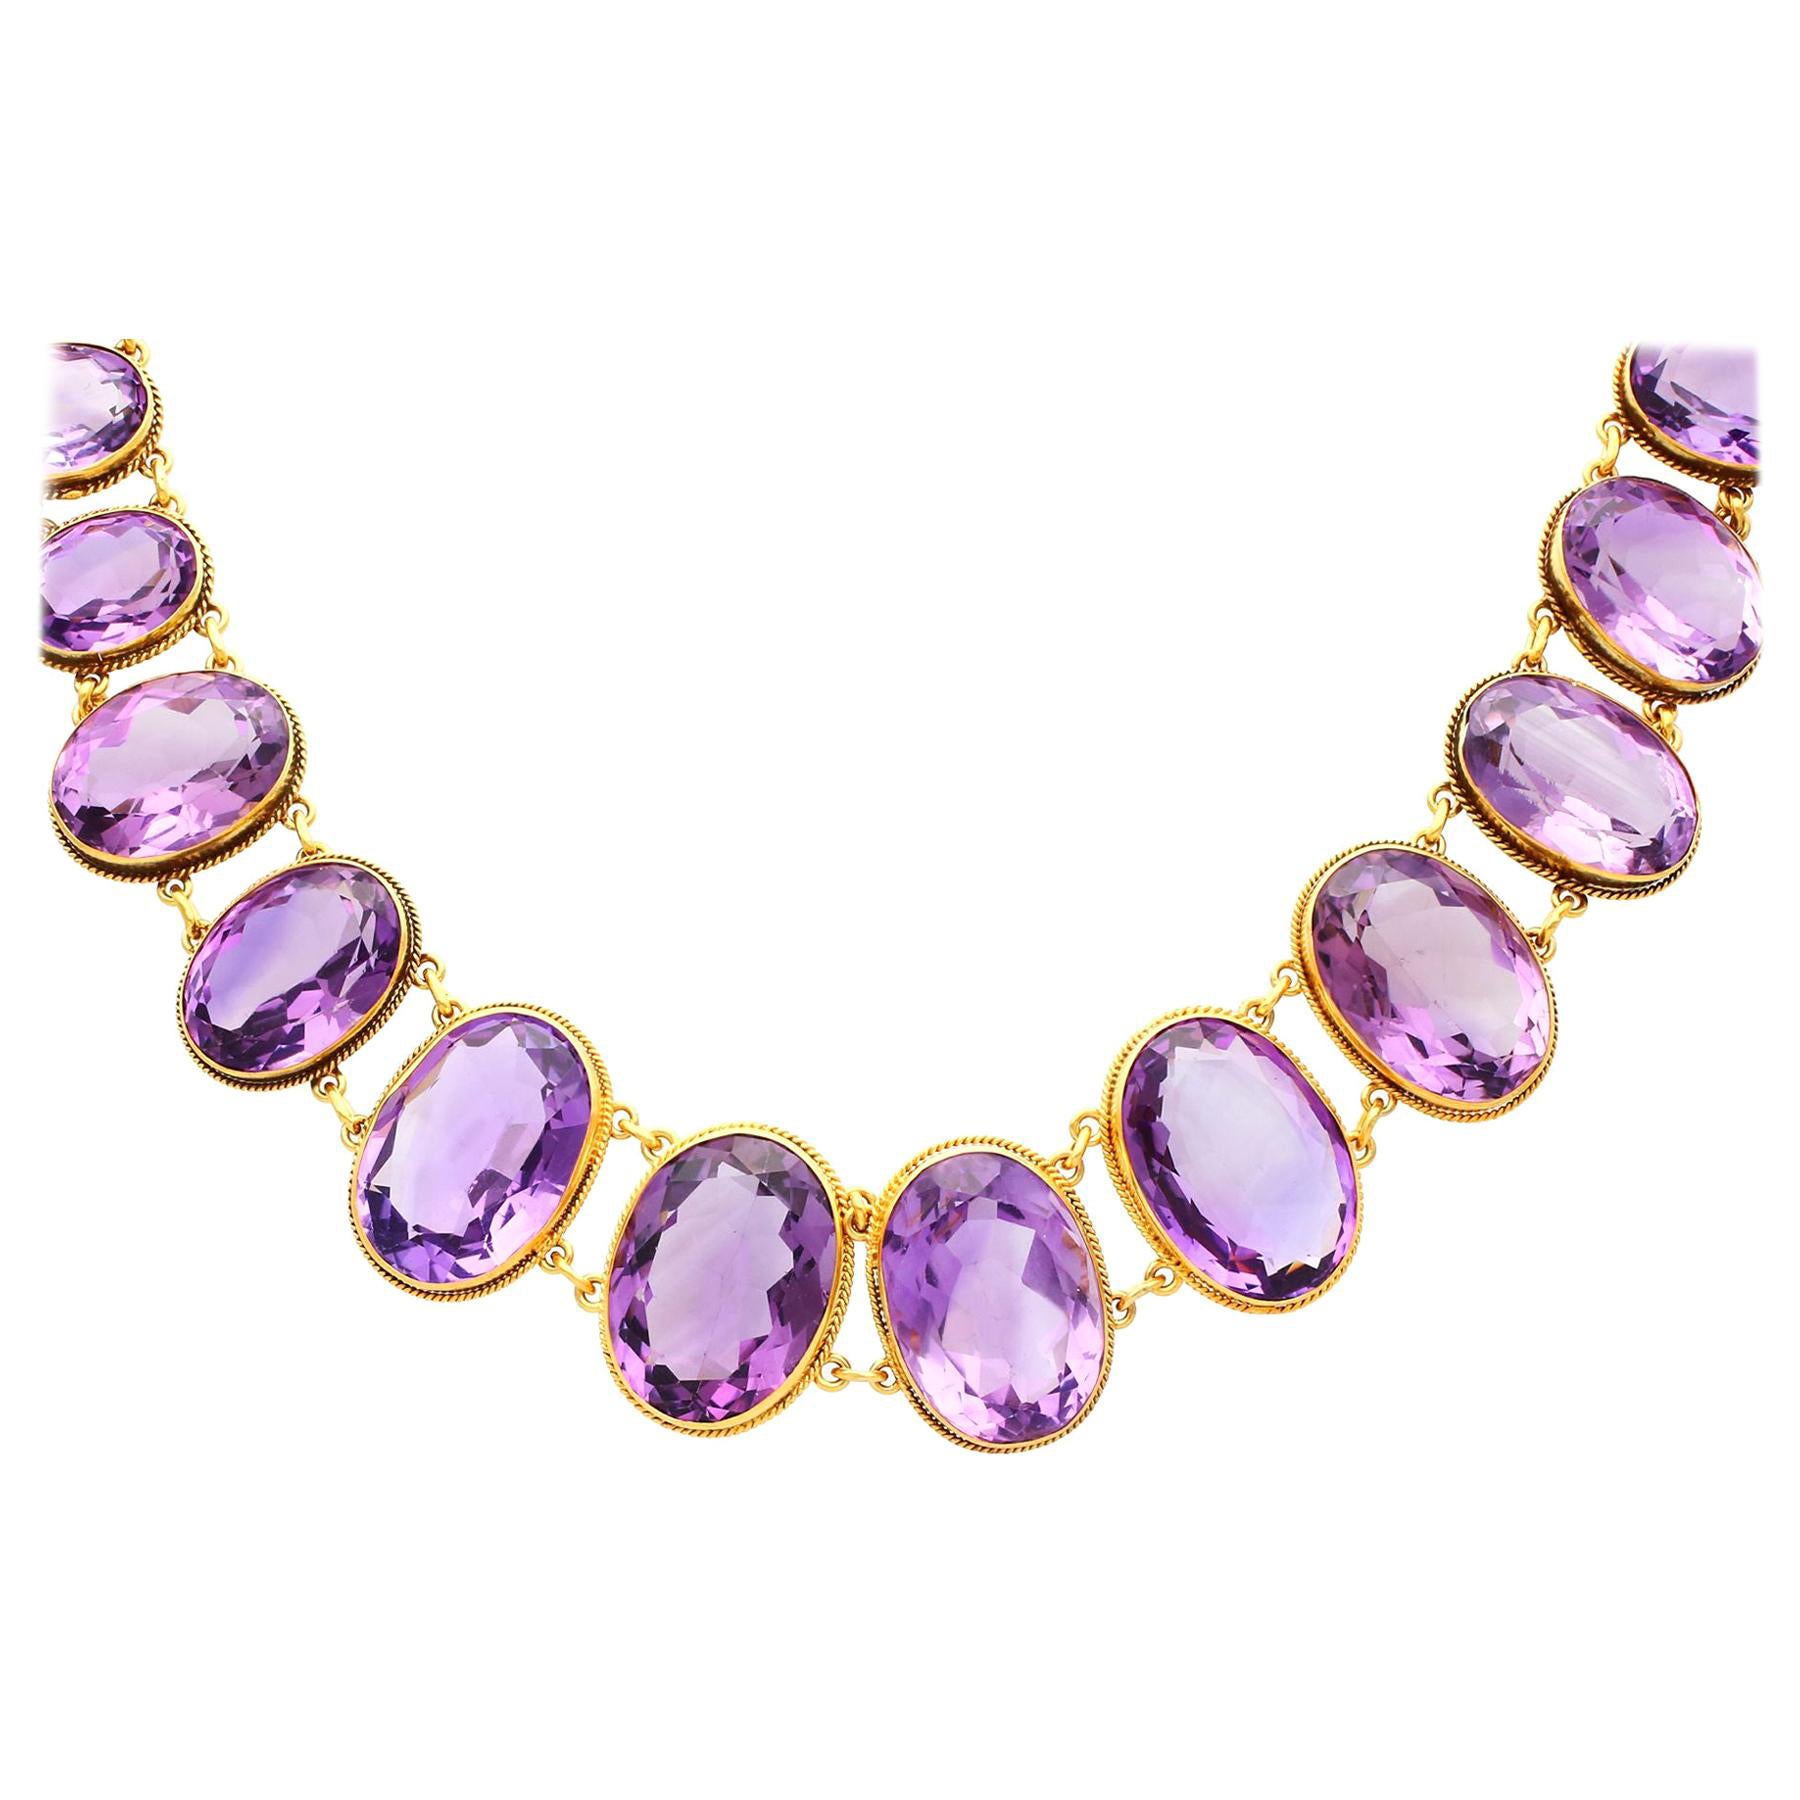 Antique Victorian 274.91 Carat Amethyst and Yellow Gold Rivière Necklace For Sale